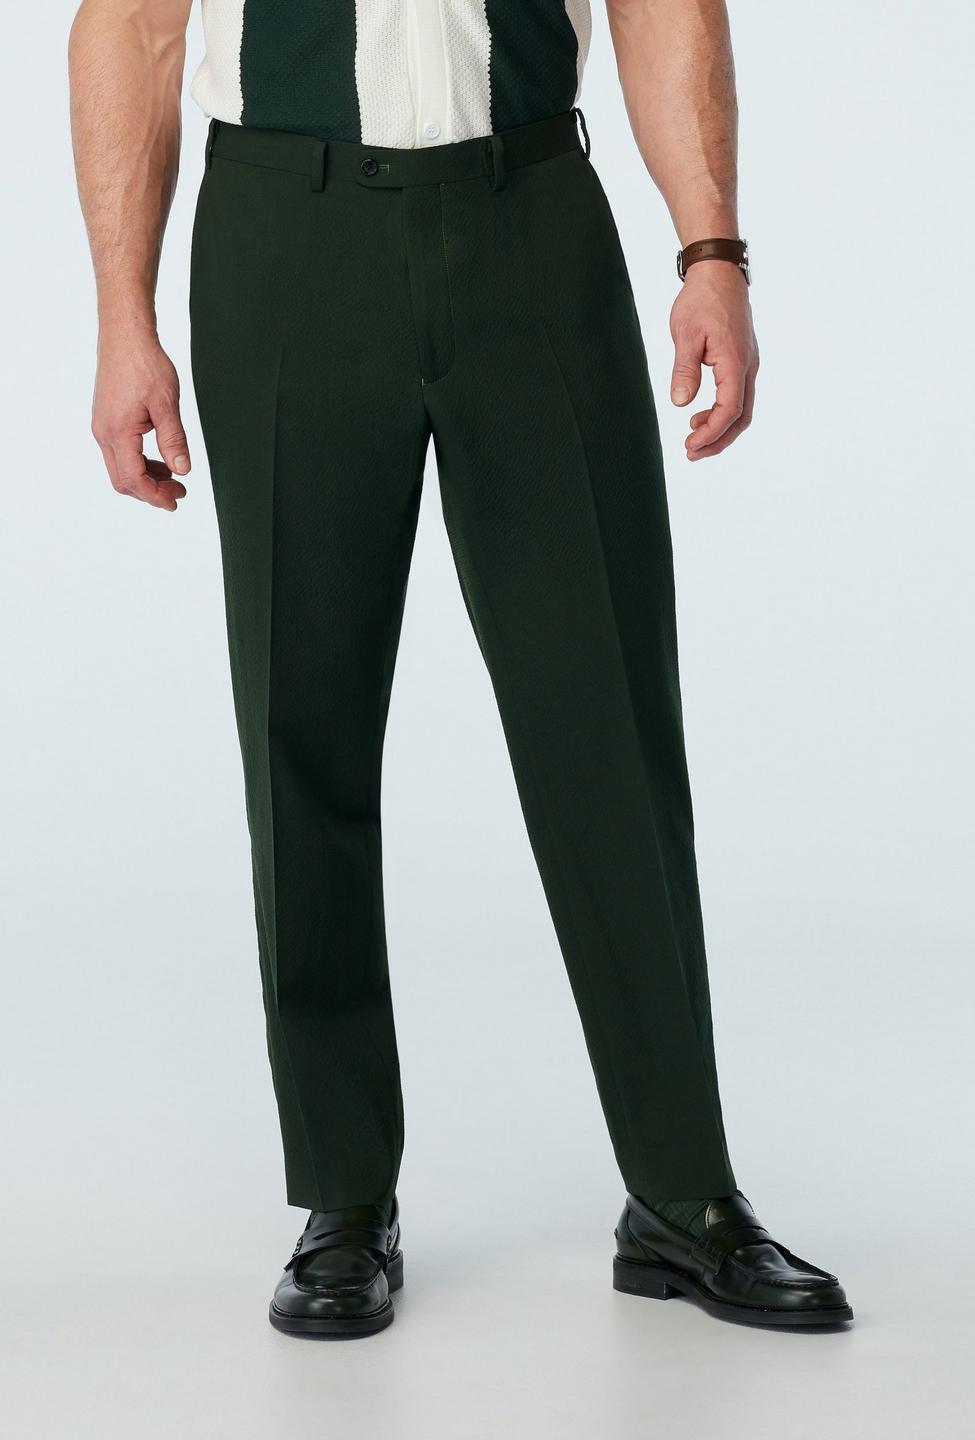 Green pants - Stapleford Solid Design from Seasonal Indochino Collection